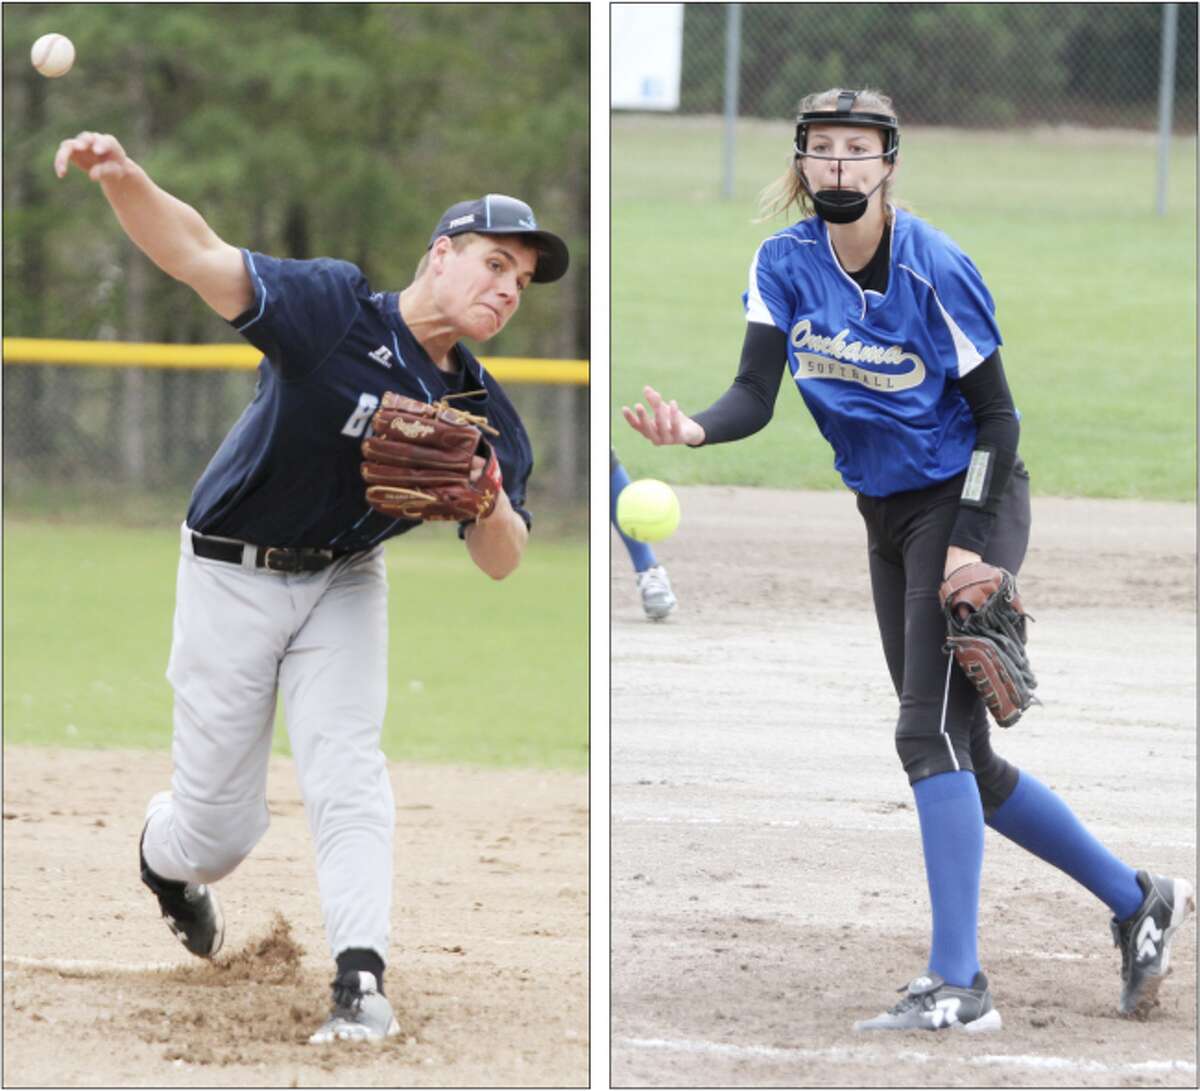 Brethren’s Jake Riggs and Onekama’s Sophie Wisniski will look to help lead their teams to respective regional championships on Saturday. The Bobcats kick off with Beal City in Fowler while the Portagers take on Marion in Holton. (News Advocate file photos)